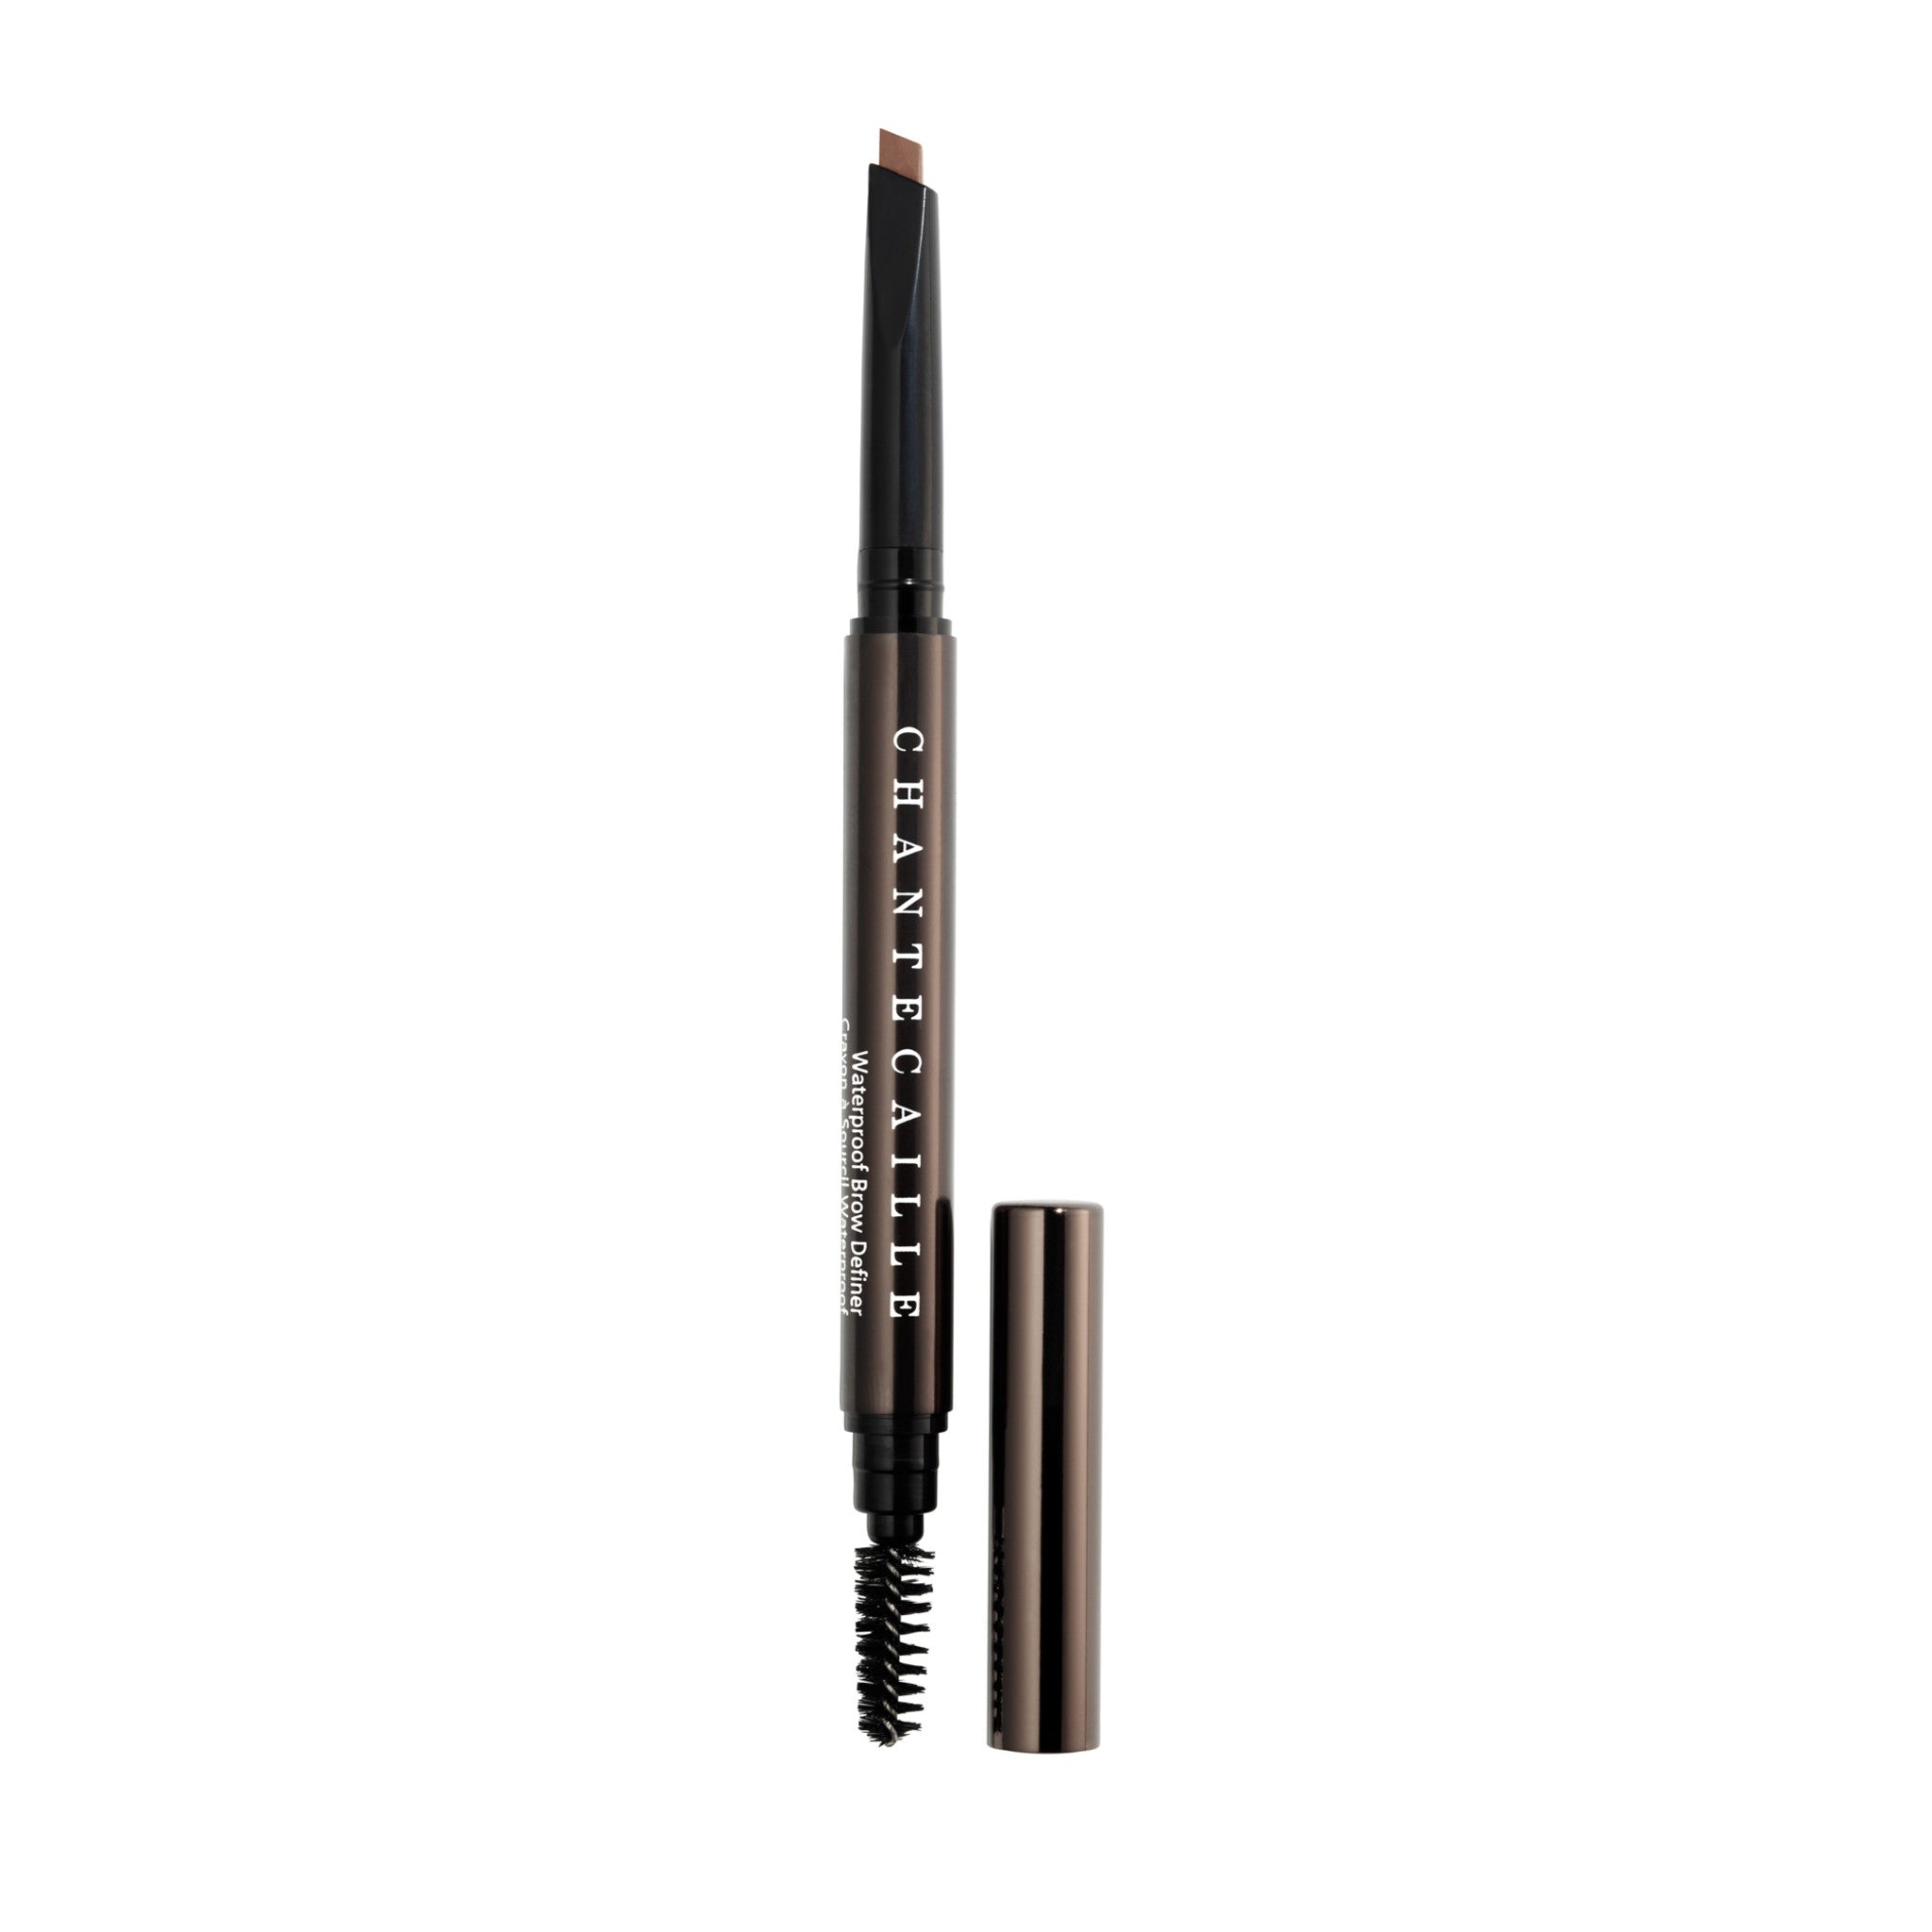 Chantecaille Waterproof Brow Definer Color/Shade variant: Ash Blonde main image. This product is in the color pink